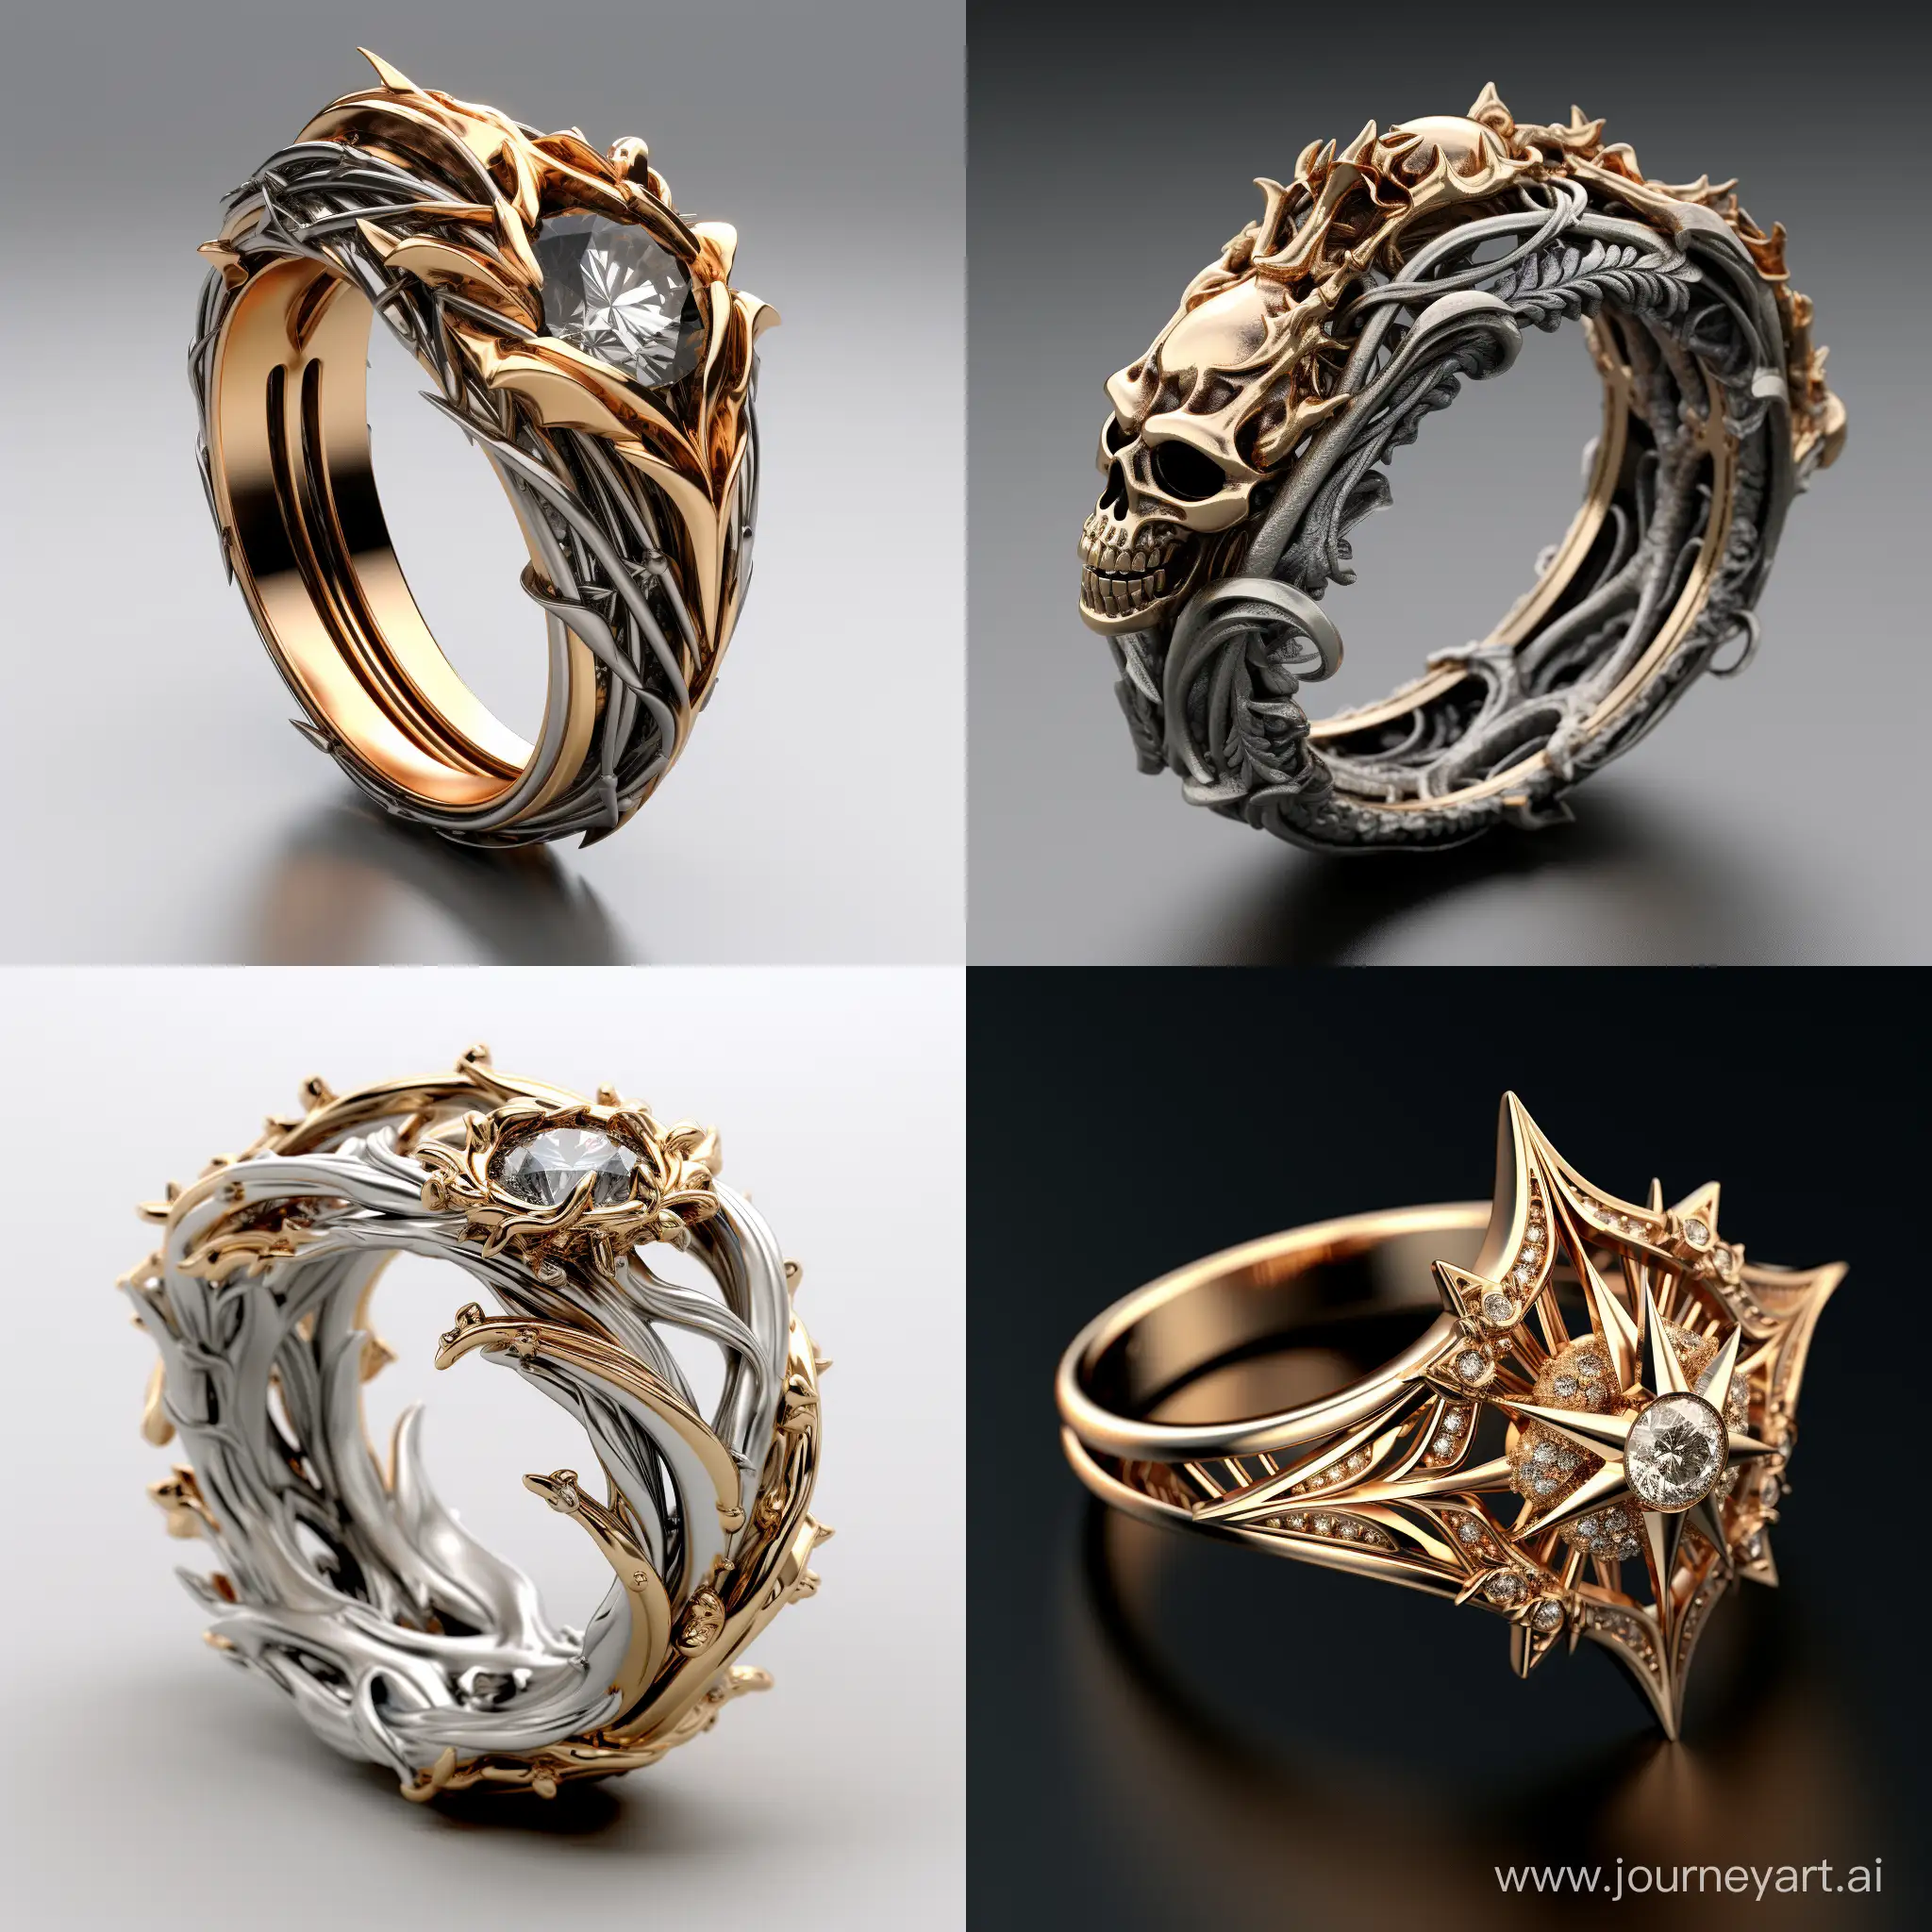 Vibrant-3D-Ring-Sculpture-on-Mirrored-Surface